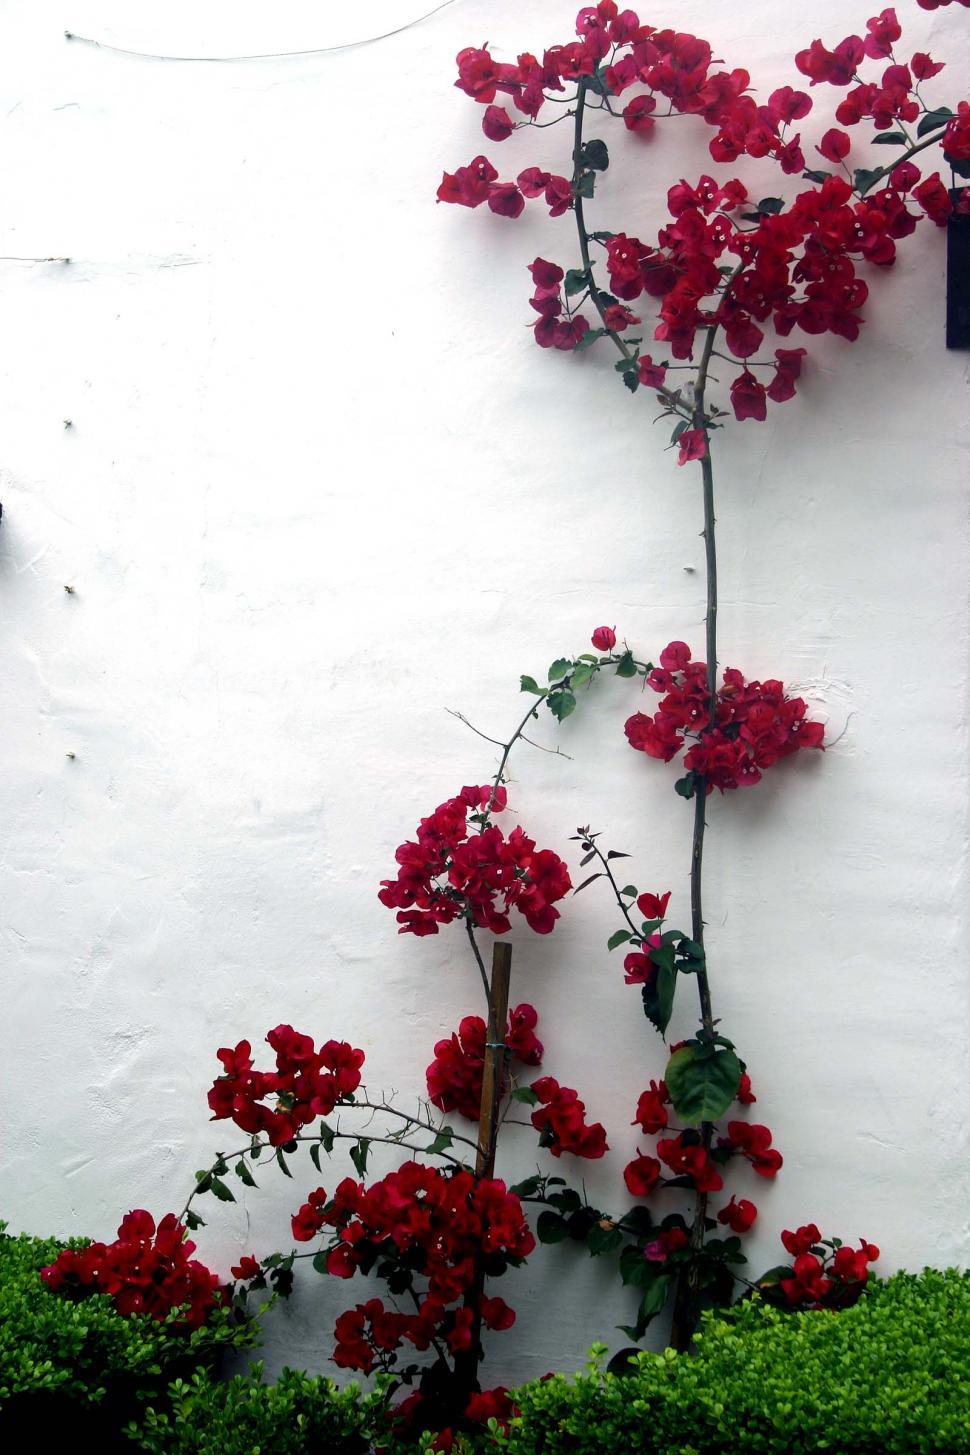 Free Image of White Wall With Red Flowers Growing 